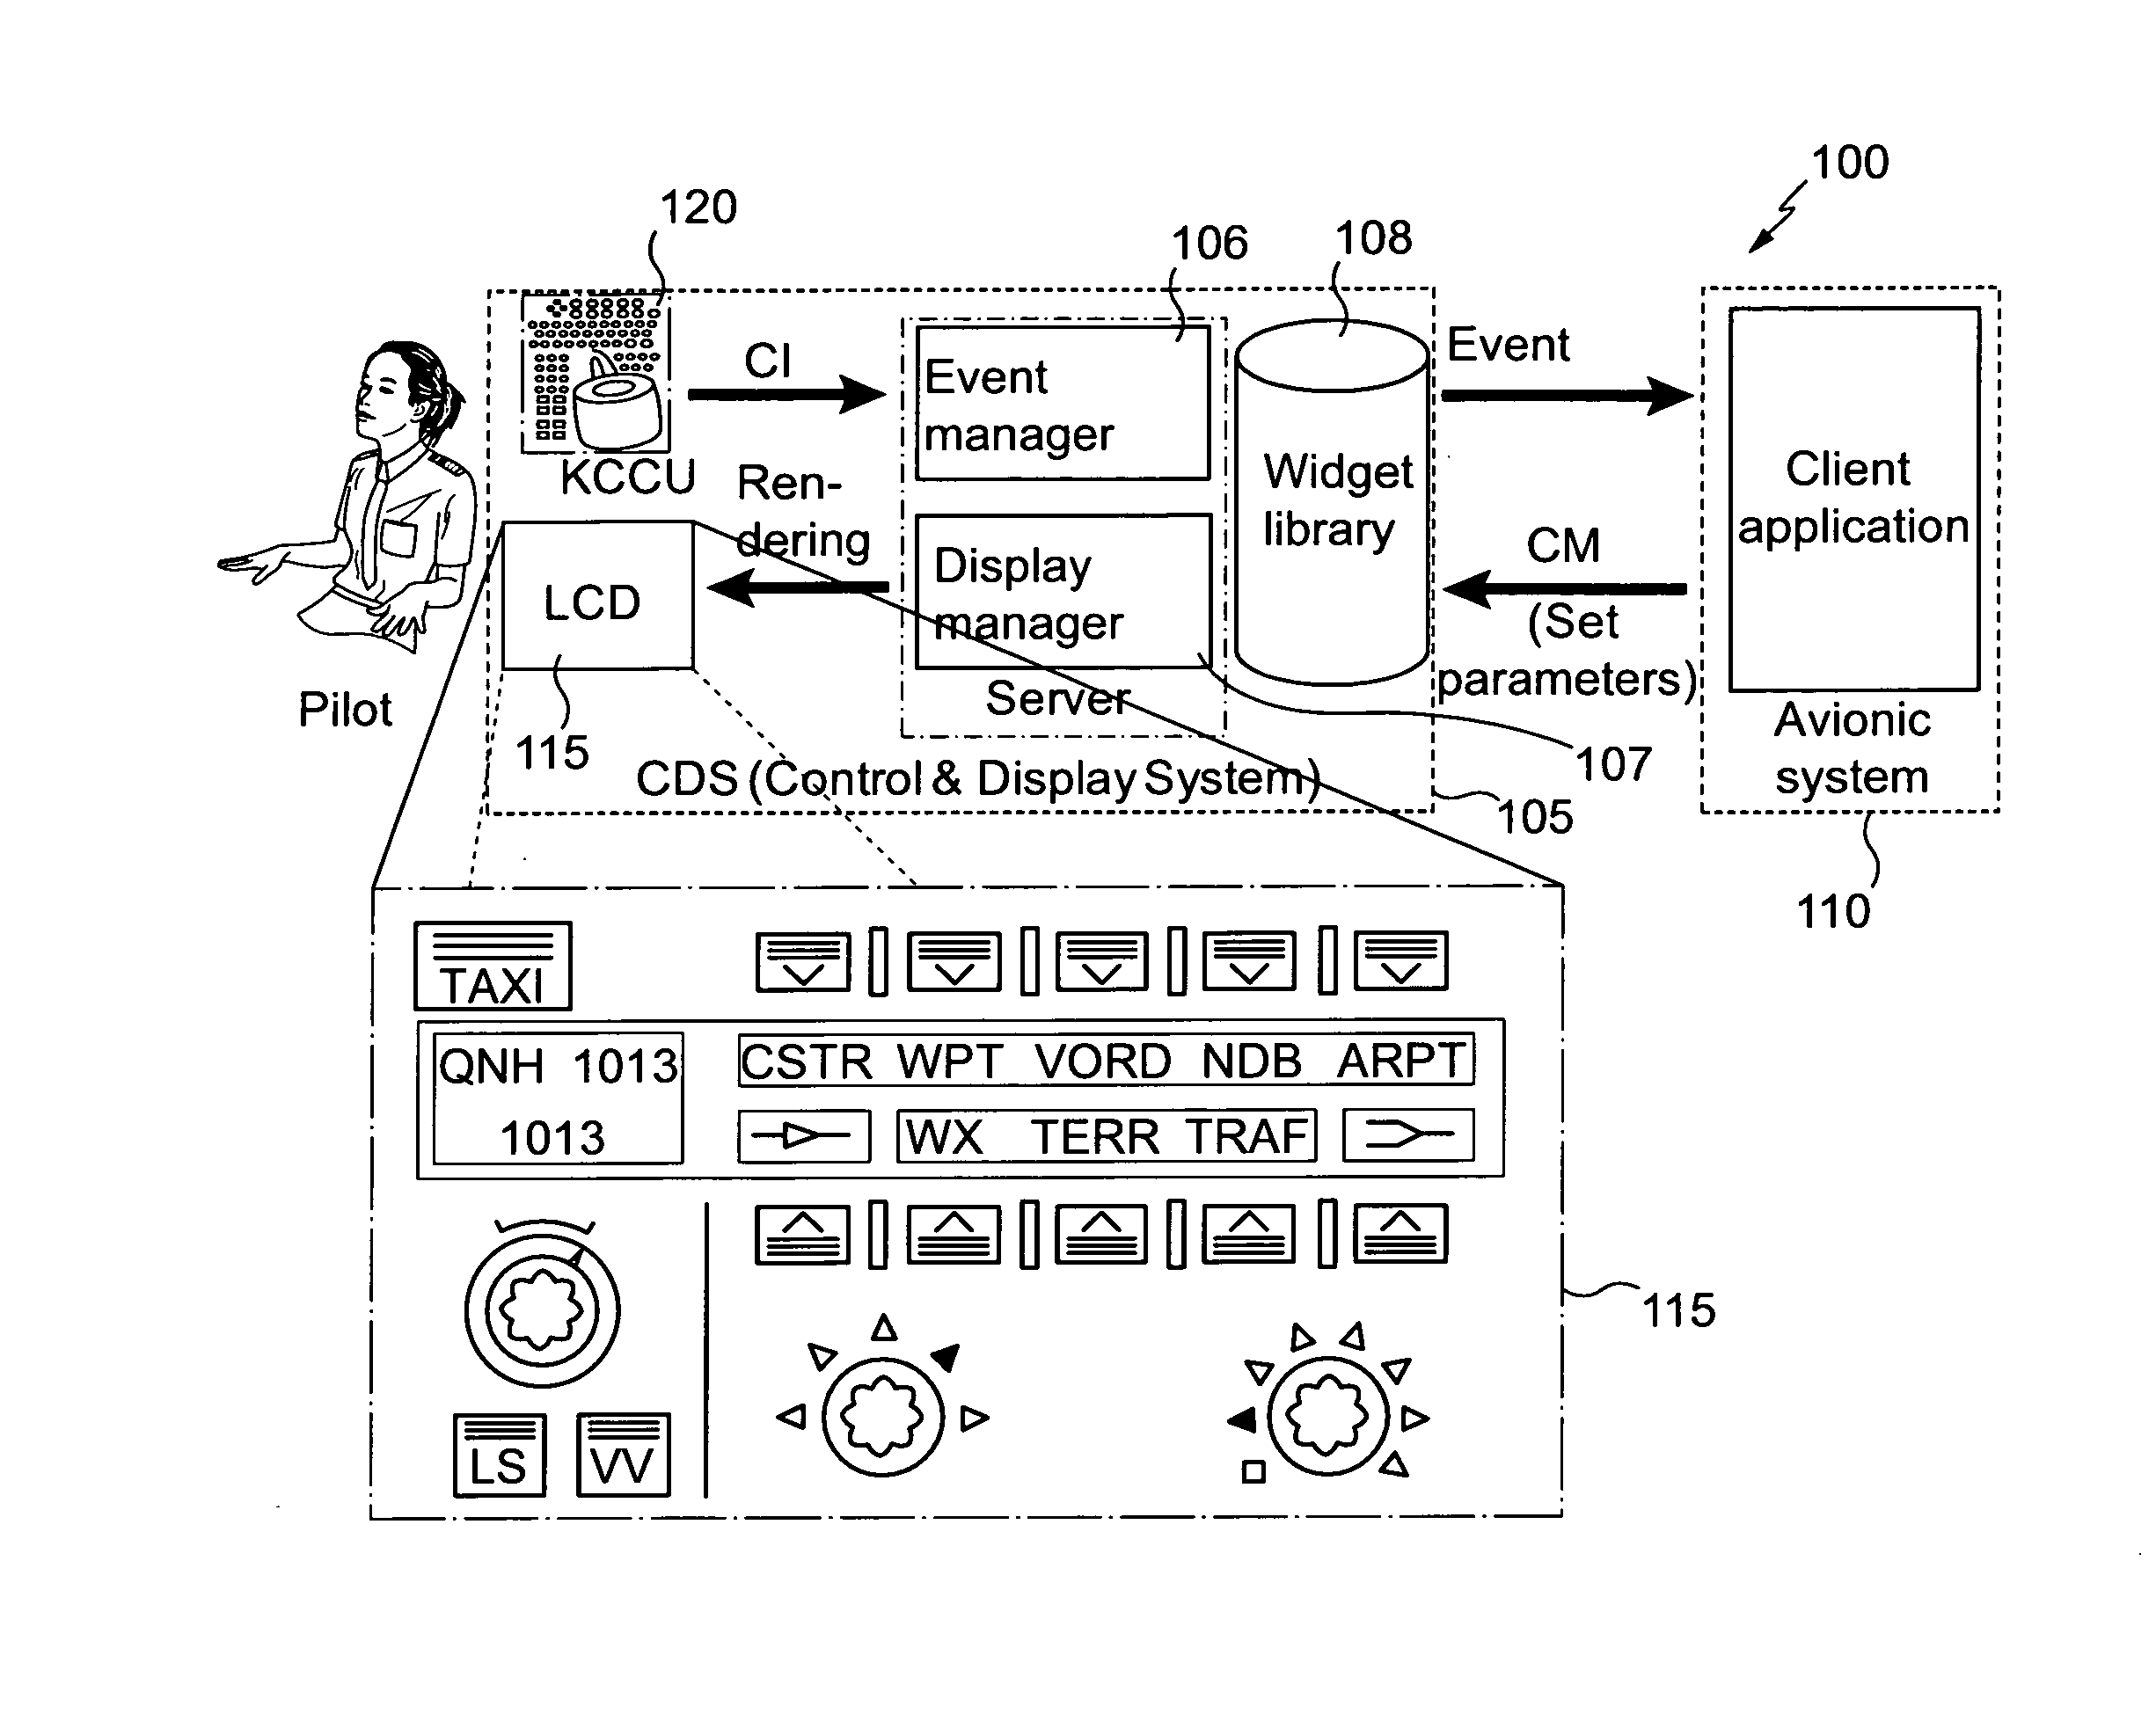 Method and system for monitoring a graphical interface in an aircraft cockpit